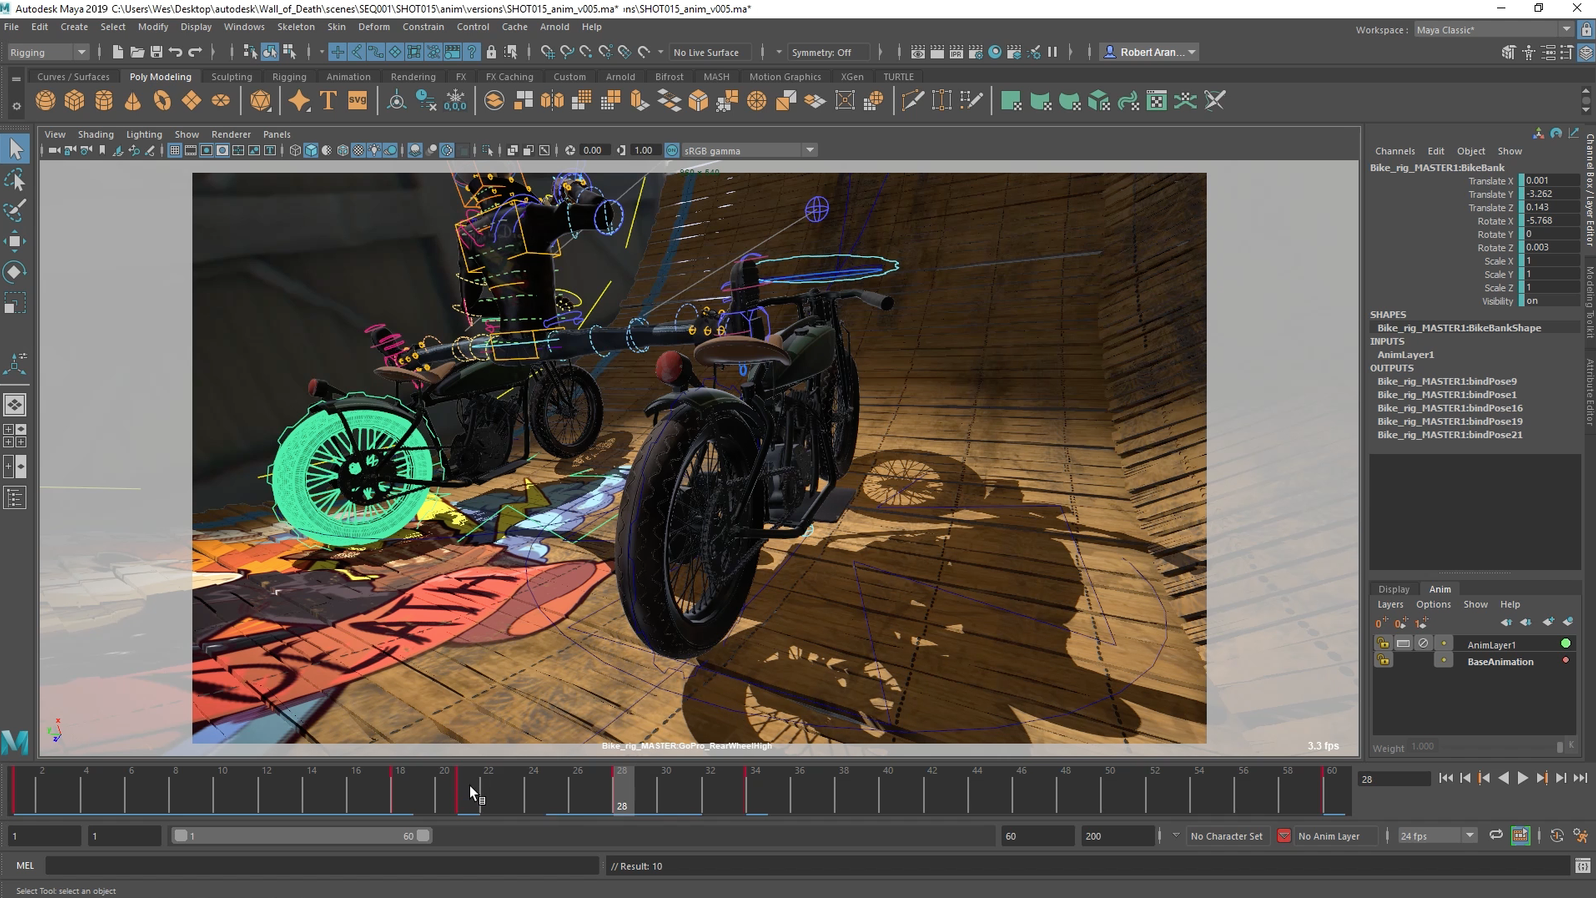 Autodesk Releases Maya 2019 with Faster Performance and Better Real-Time  Previews - Studio Daily